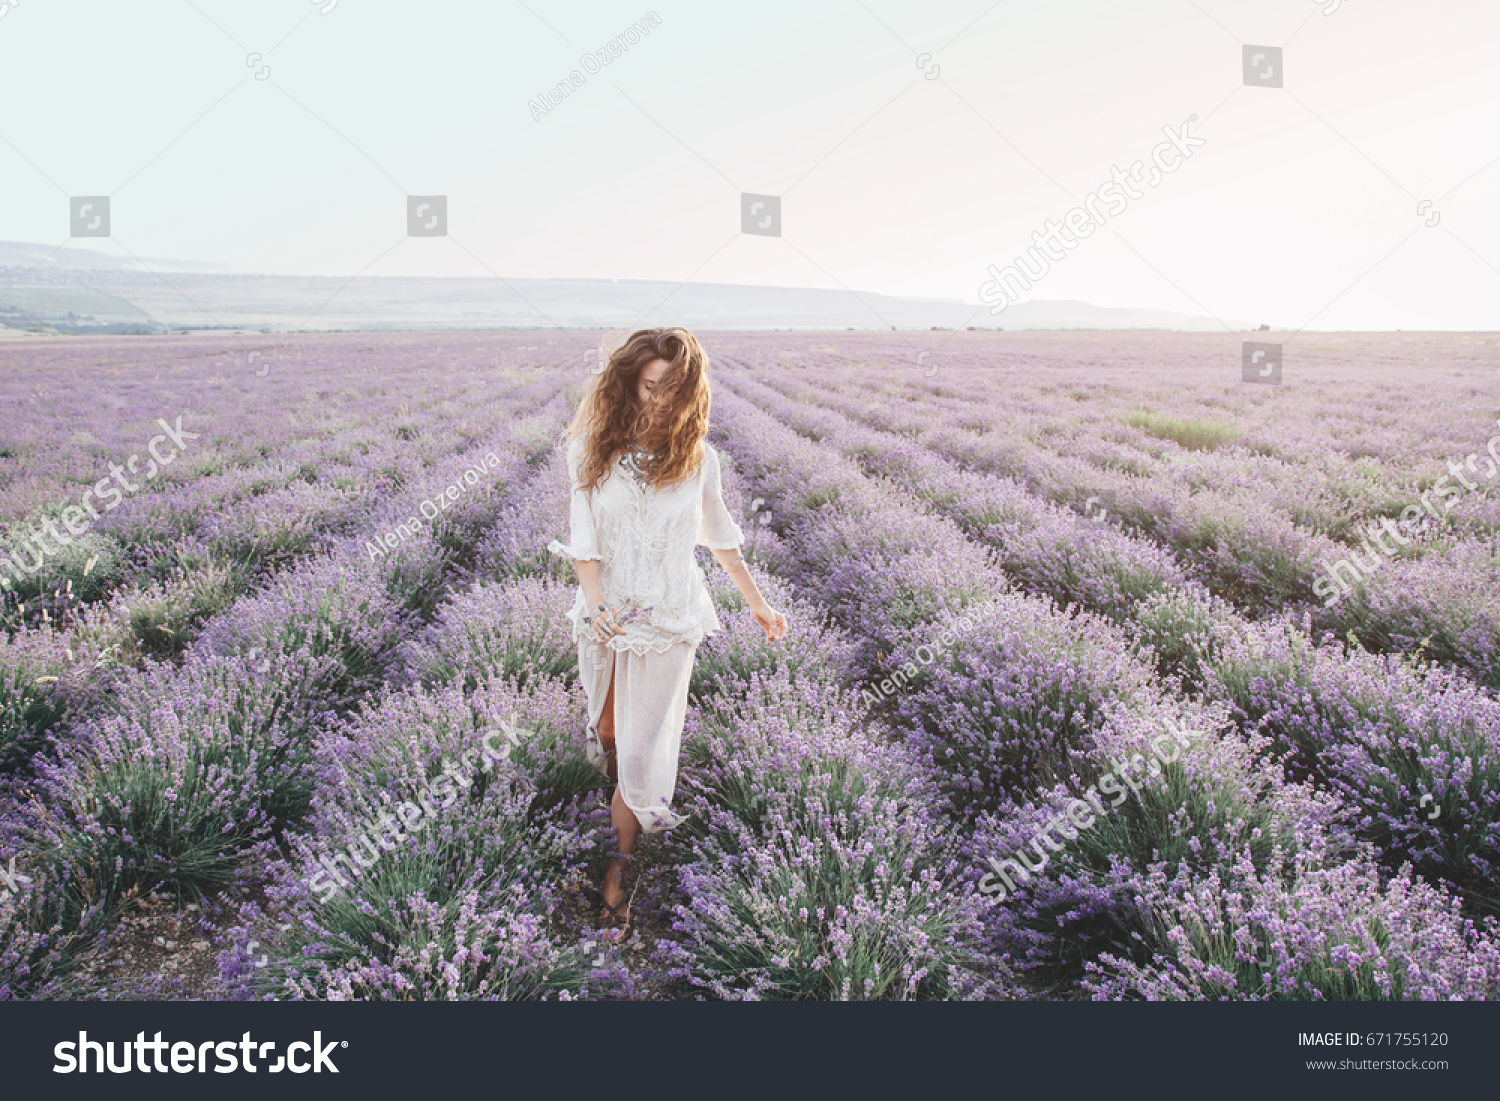 Beautiful model walking in spring or summer lavender field in sunrise backlit. Boho style clothing and jewelry. #671755120